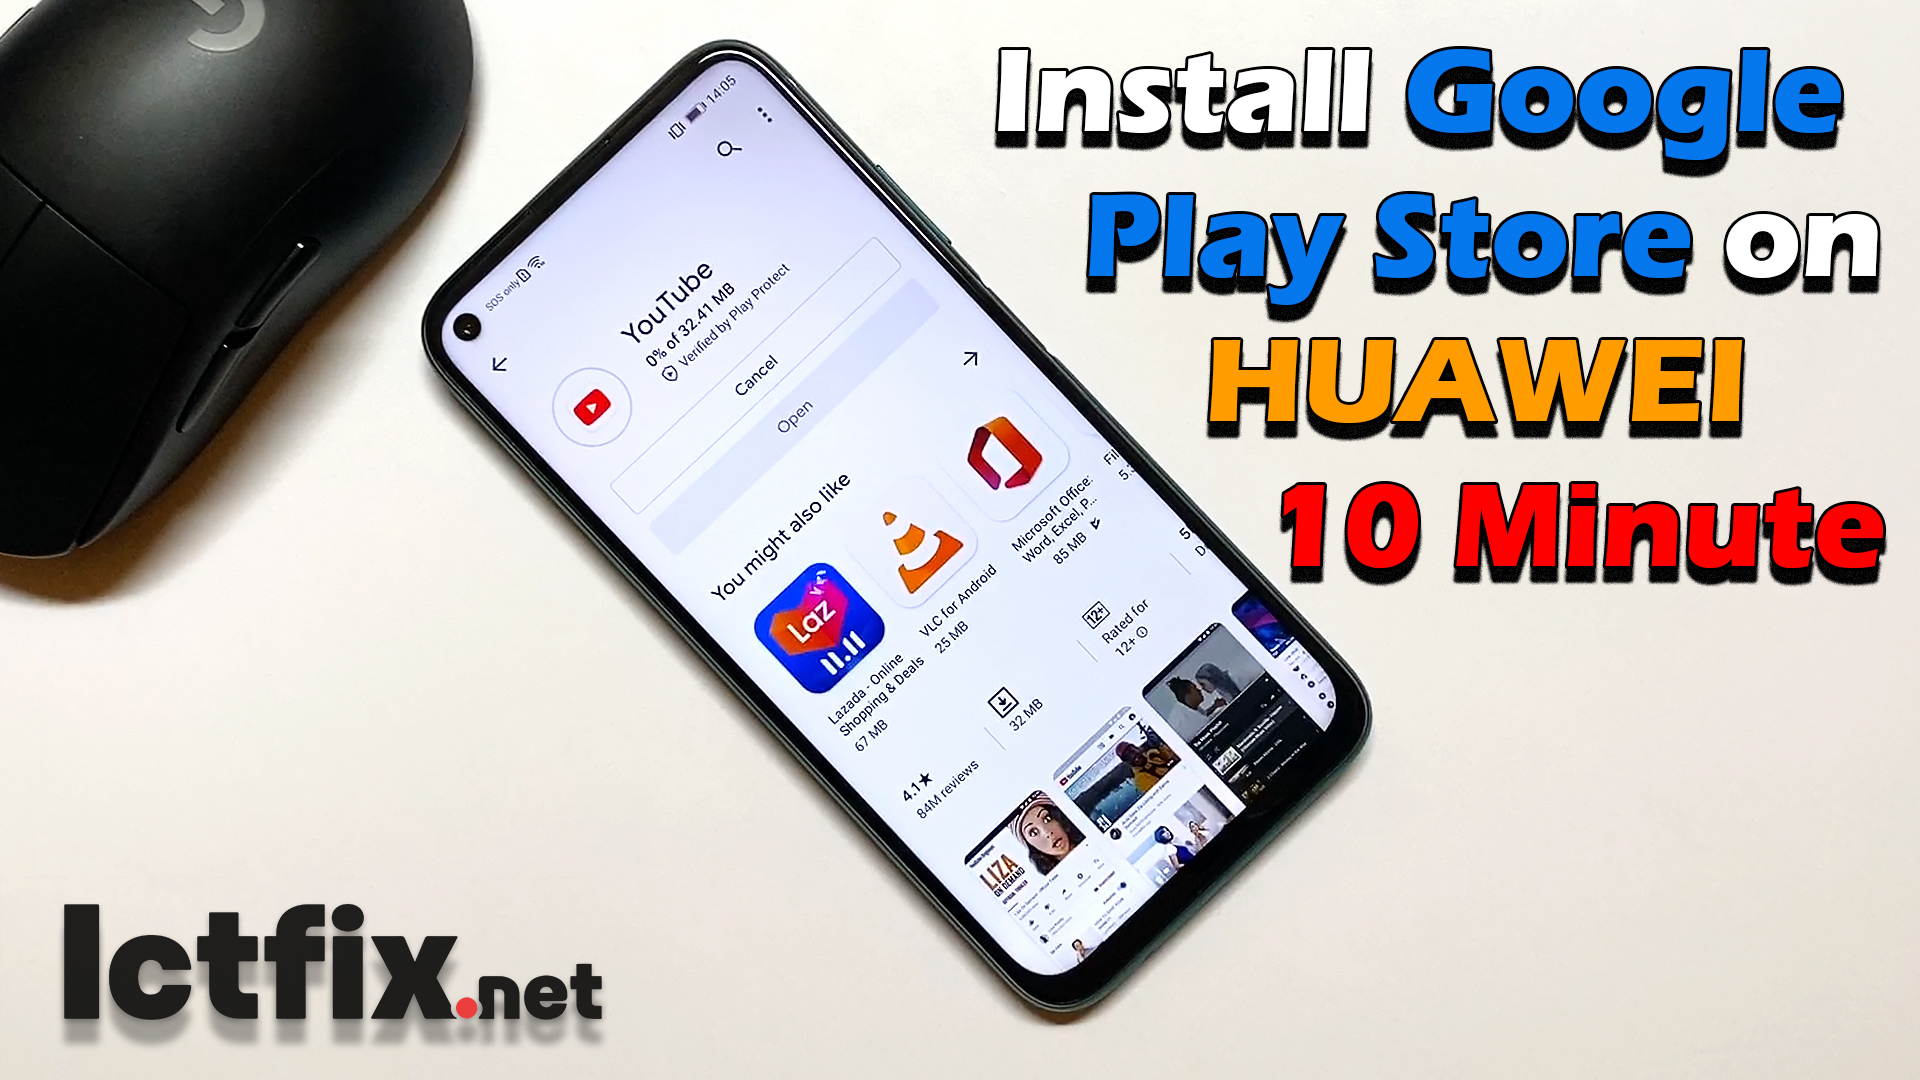 Install Google Play Store on HUAWEI 10 Minute - ICTfix